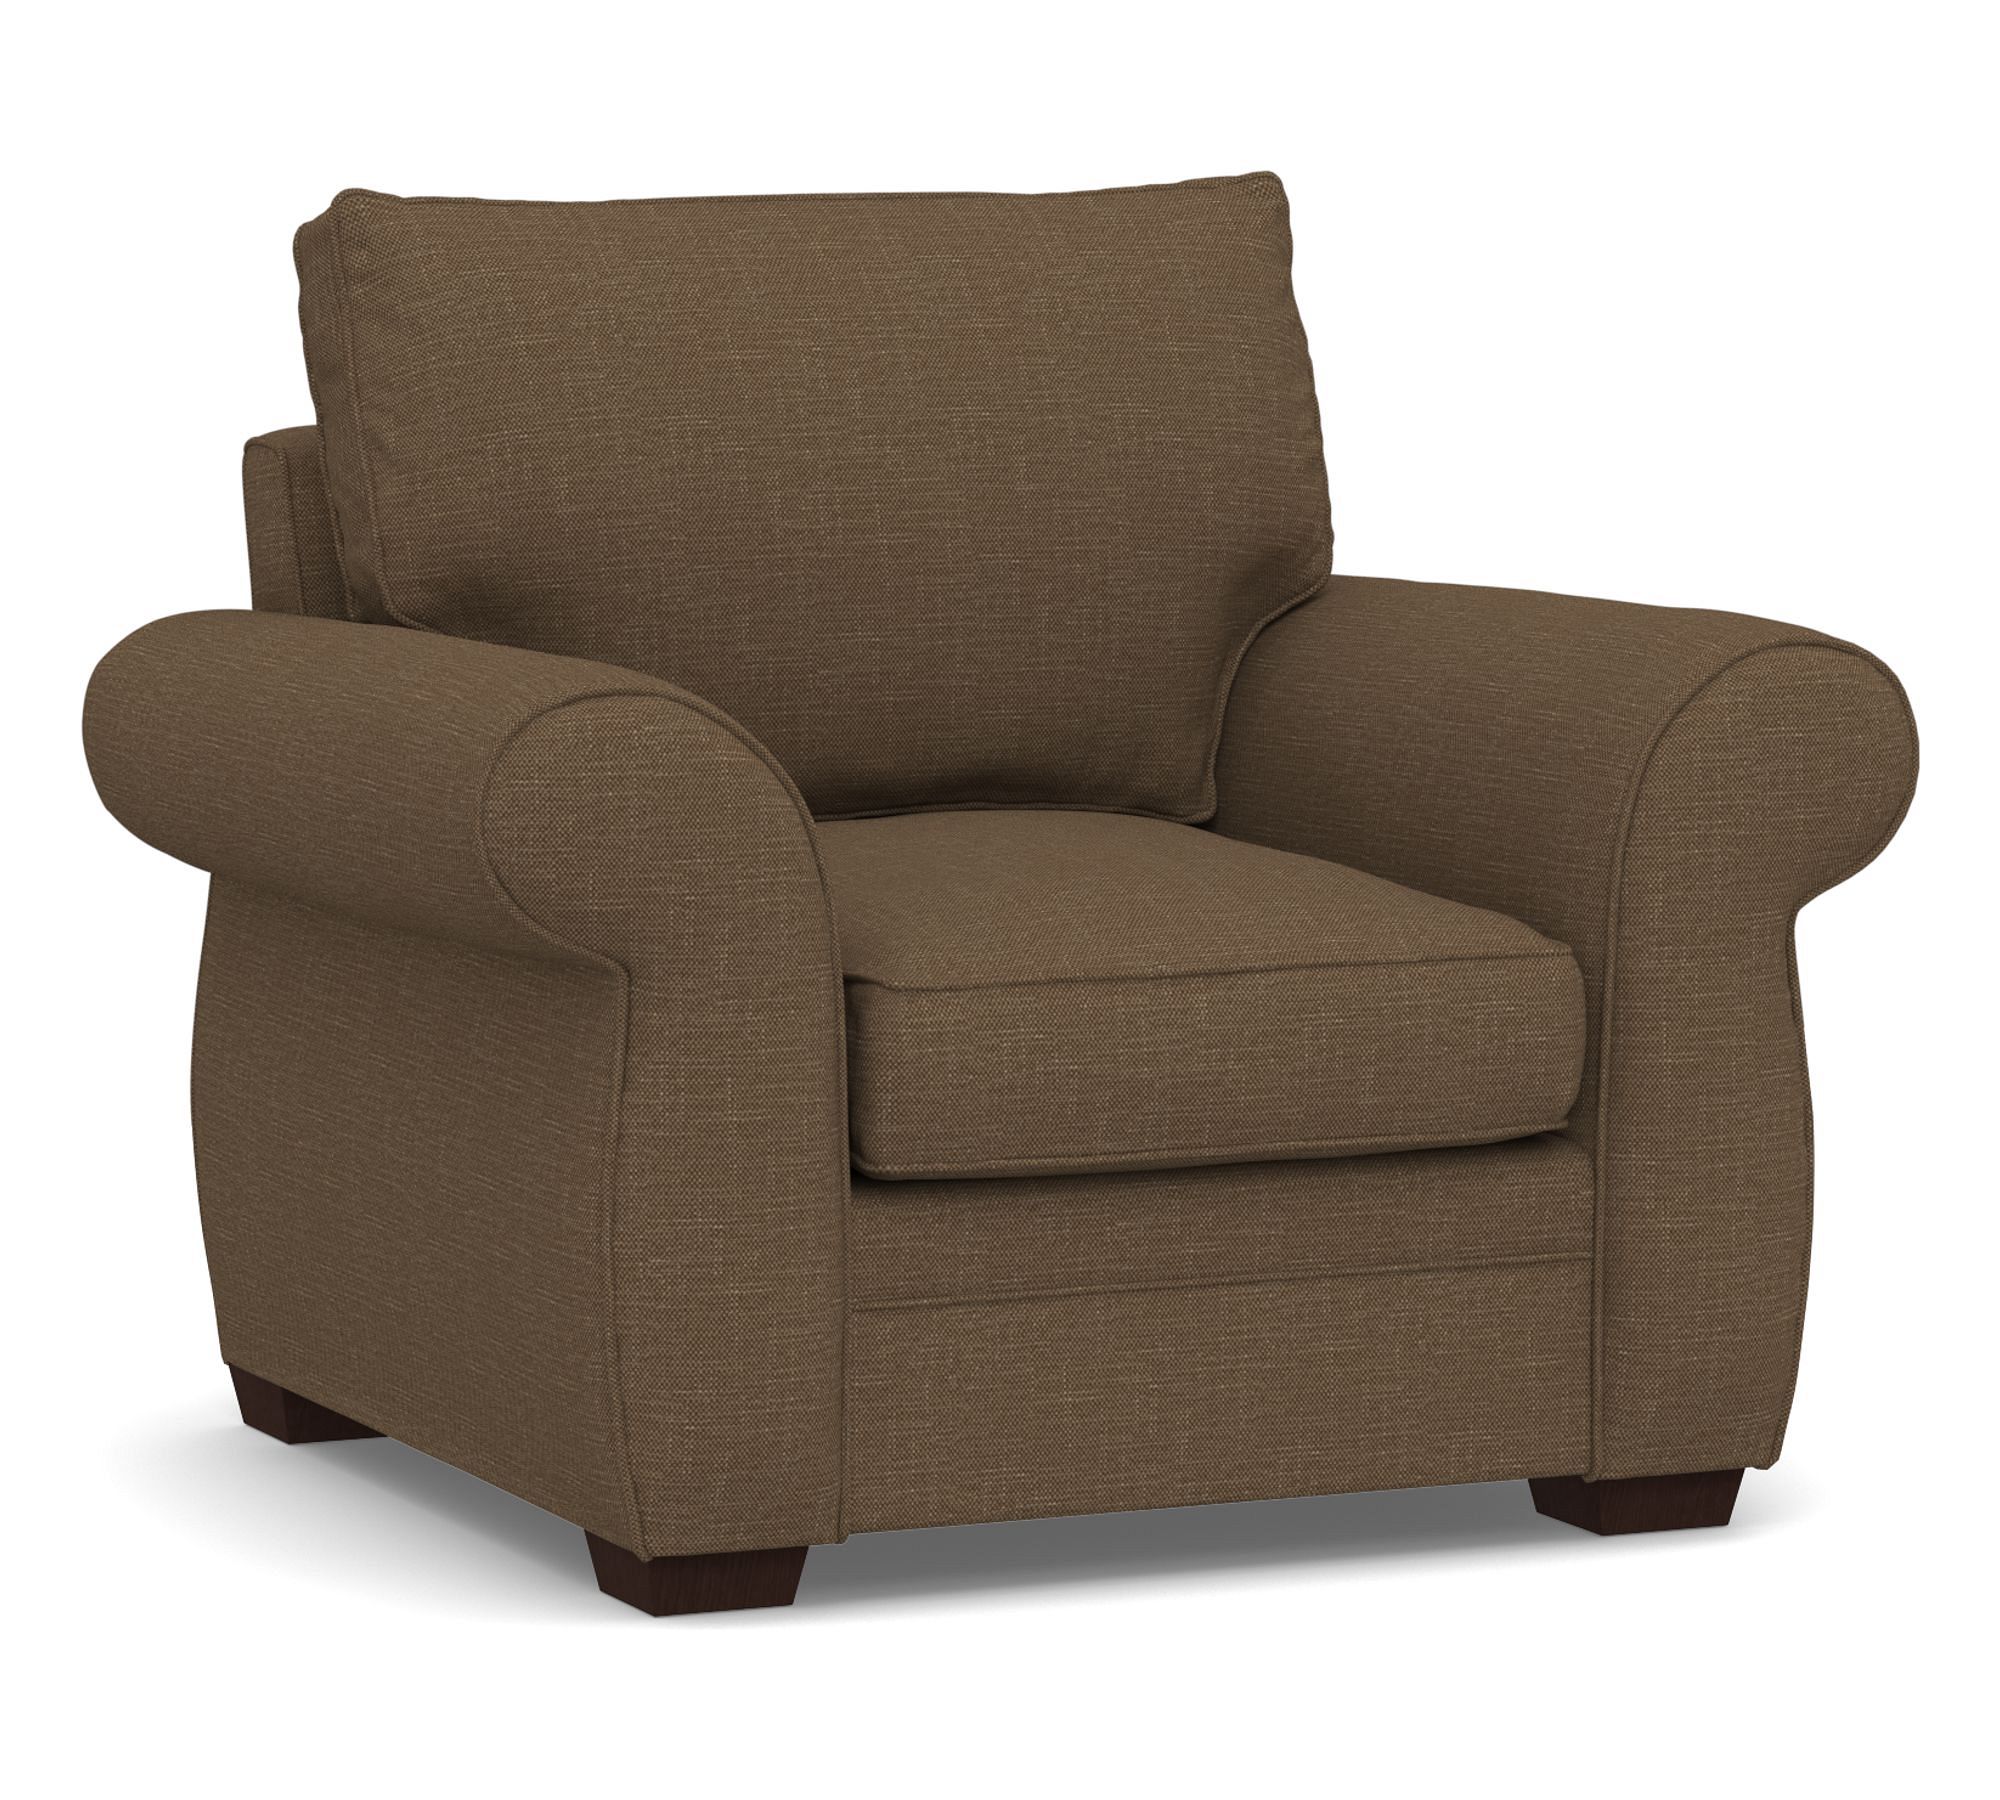 Pearce Roll Arm Recliner